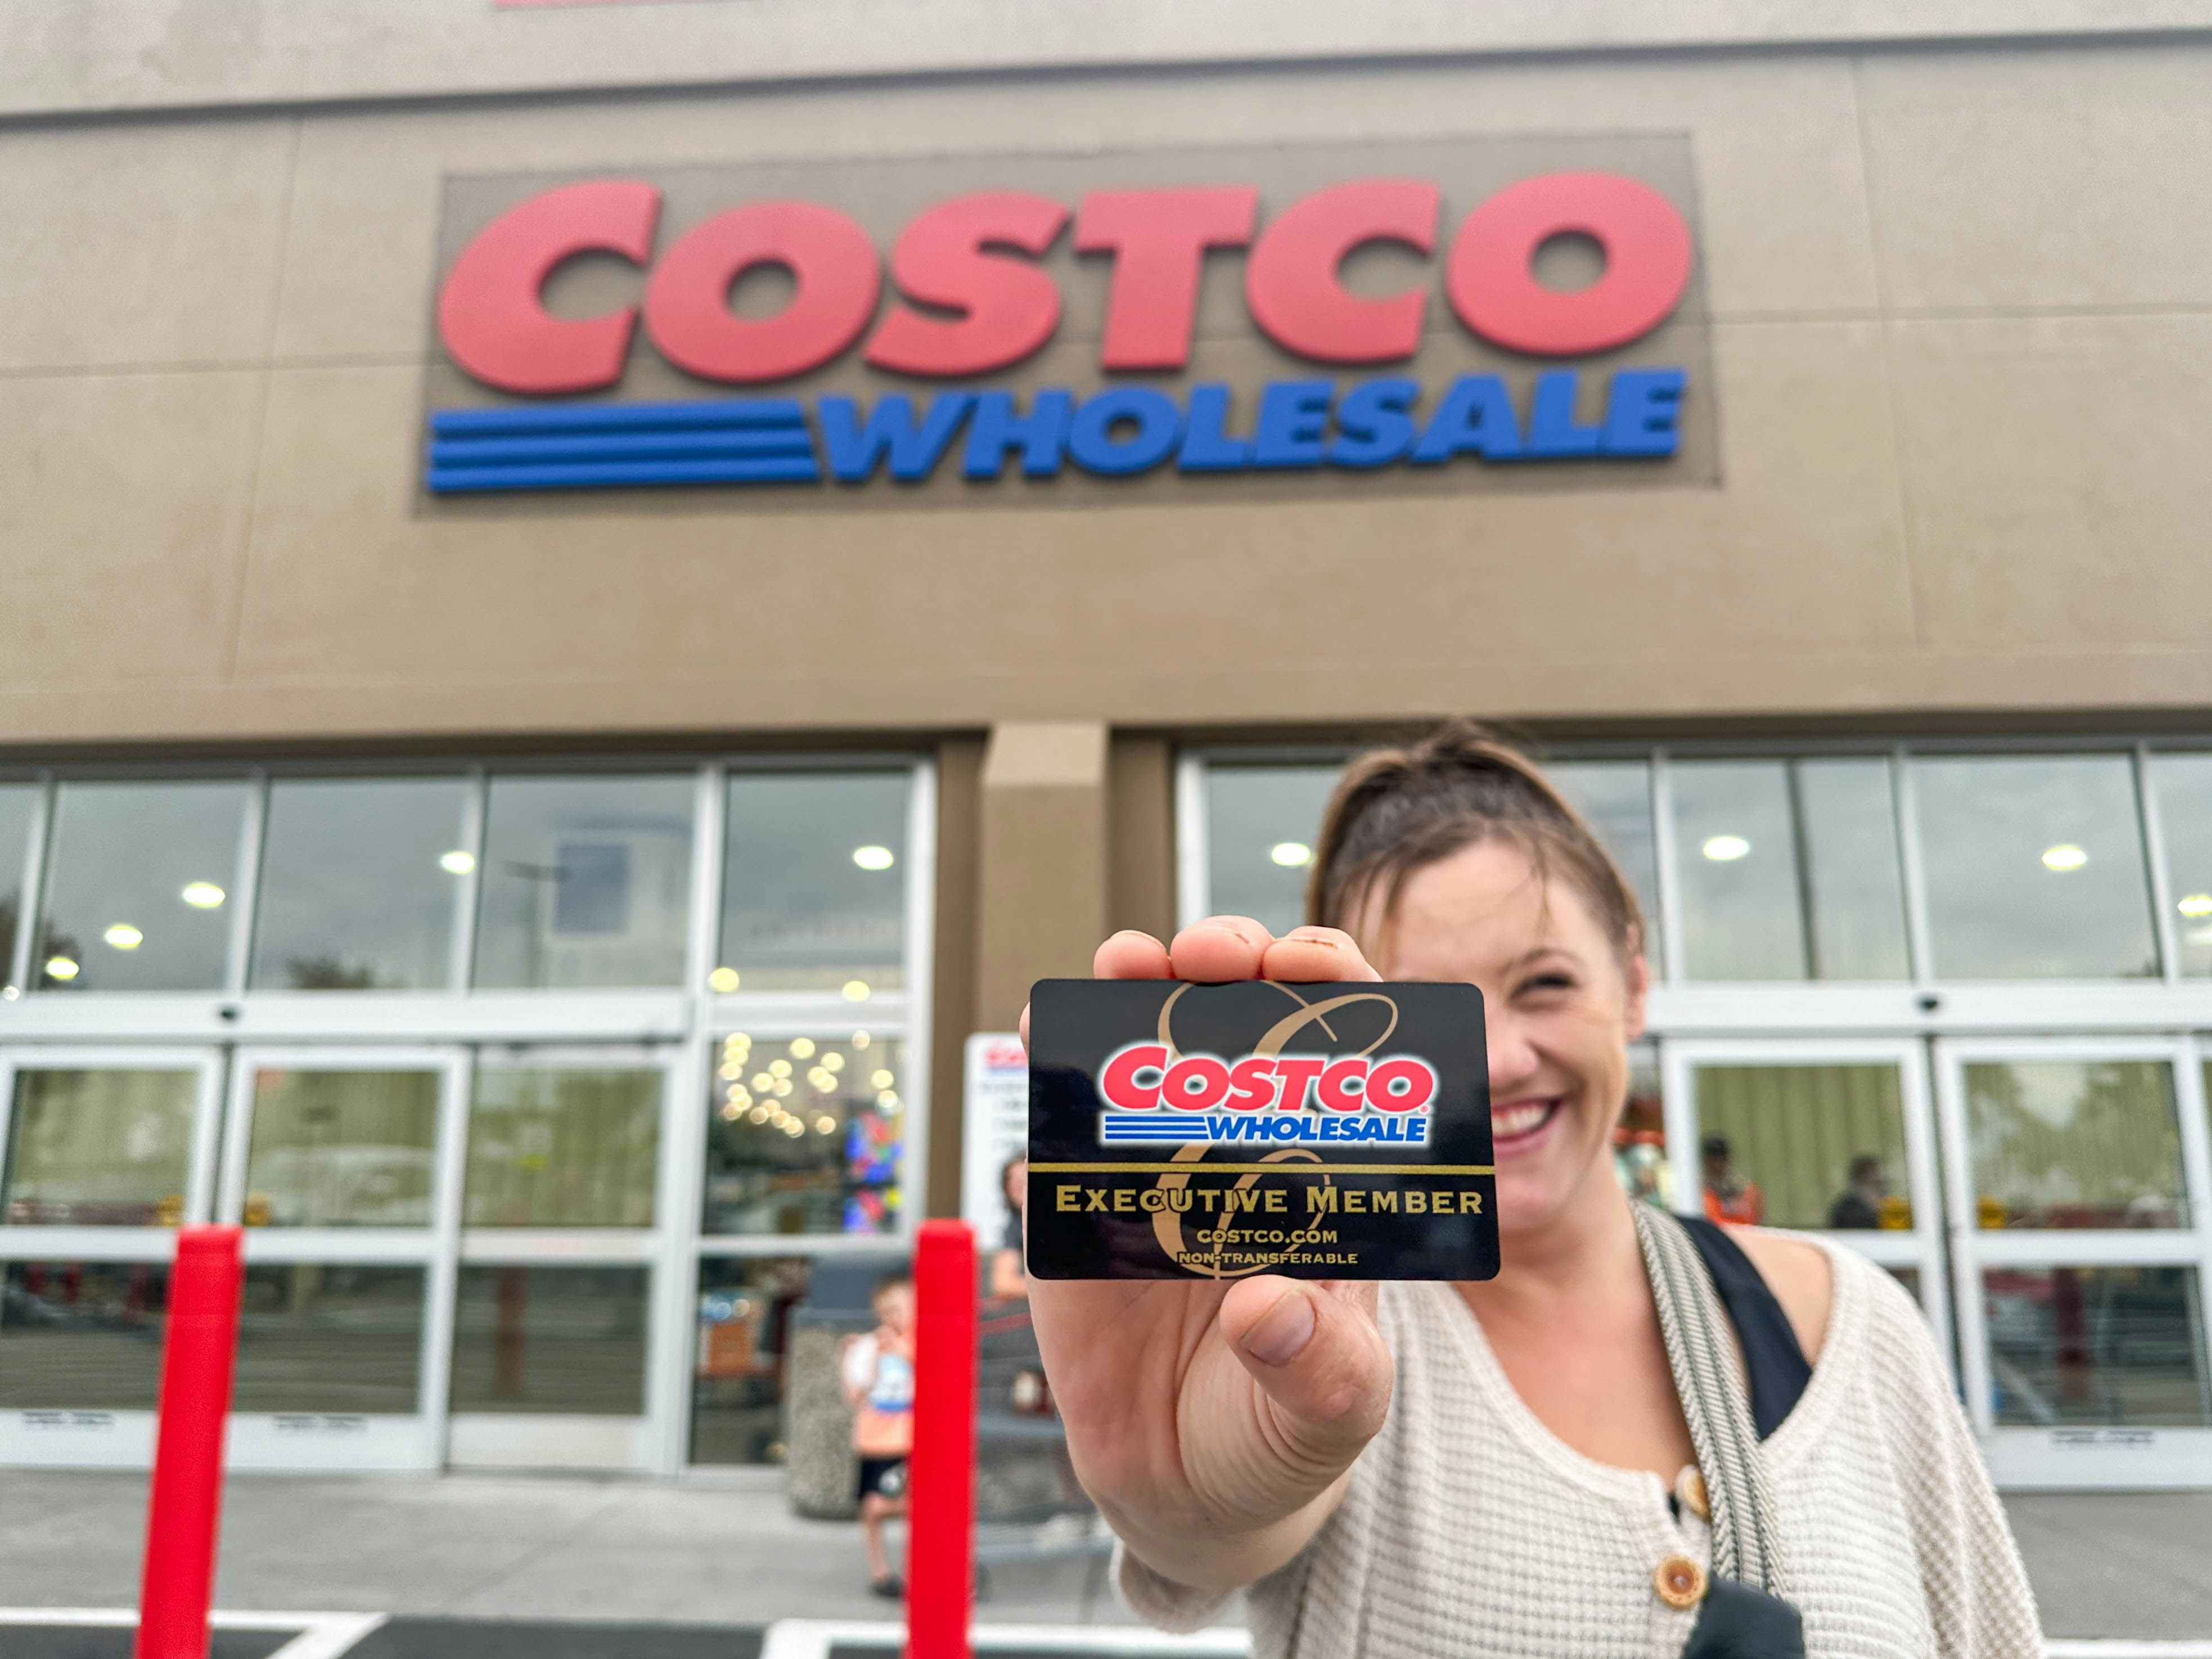 a person holding up a costco shopping card